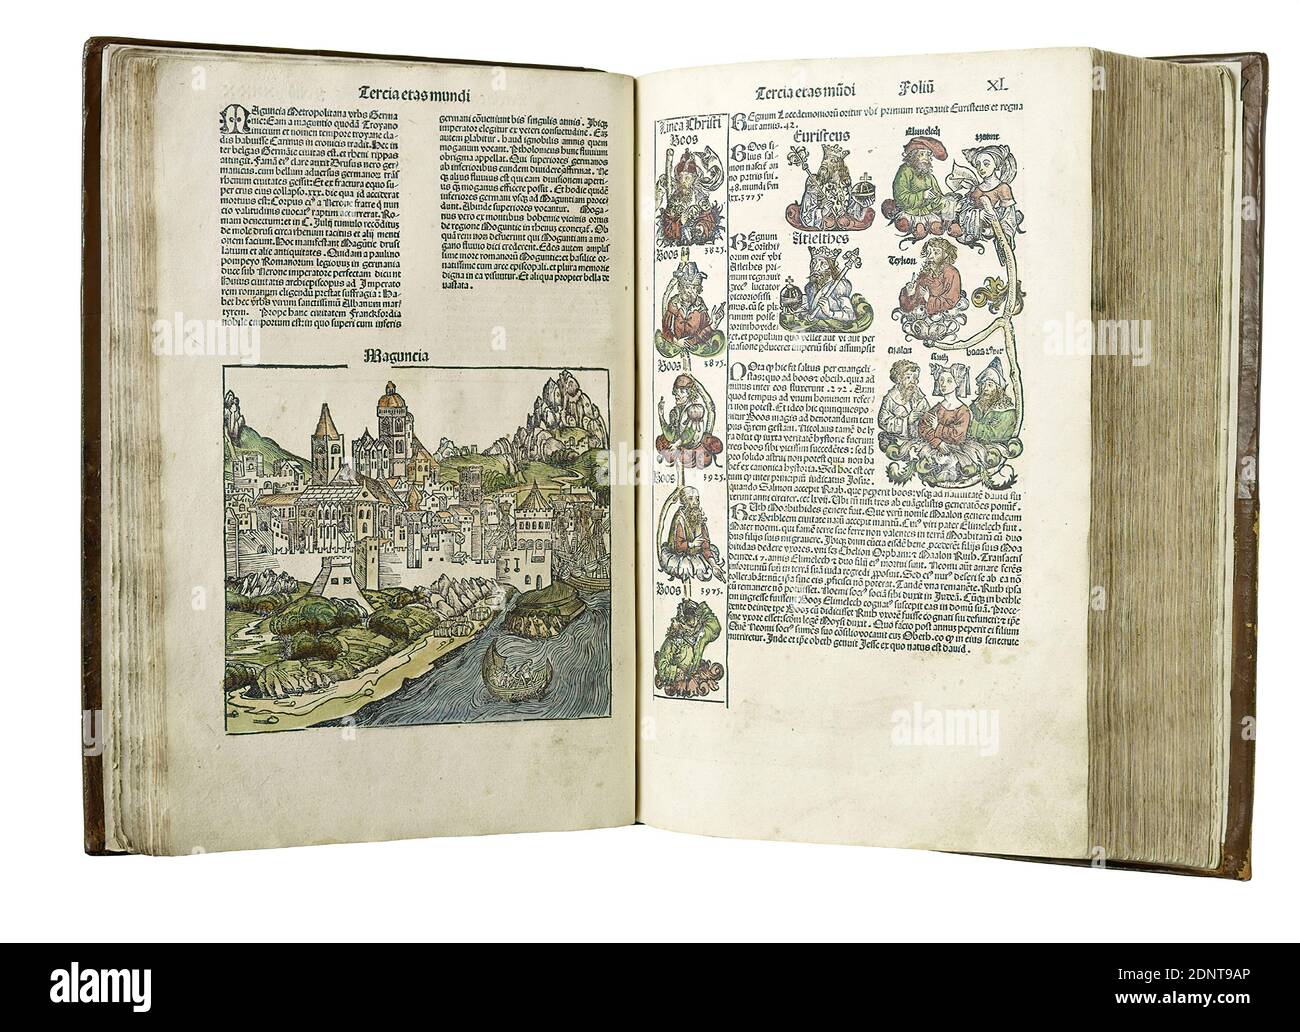 Anton Koberger, Wilhelm Pleydenwurff, Hartmann Schedel, Michael Wolgemut, Schedel's World Chronicle, paper, woodcut, Total: Height: 44,00 cm; Width: 32,00 cm; Depth: 8,50 cm, printed matter, town, city view (veduta), city maps, Renaissance, A highlight in book illustration on the threshold between the Middle Ages and modern times is the so-called Schedel's World Chronicle. The Nuremberg city physician and humanist Hartmann Schedel published a Latin and a German edition of his chronicle in 1493. Stock Photo